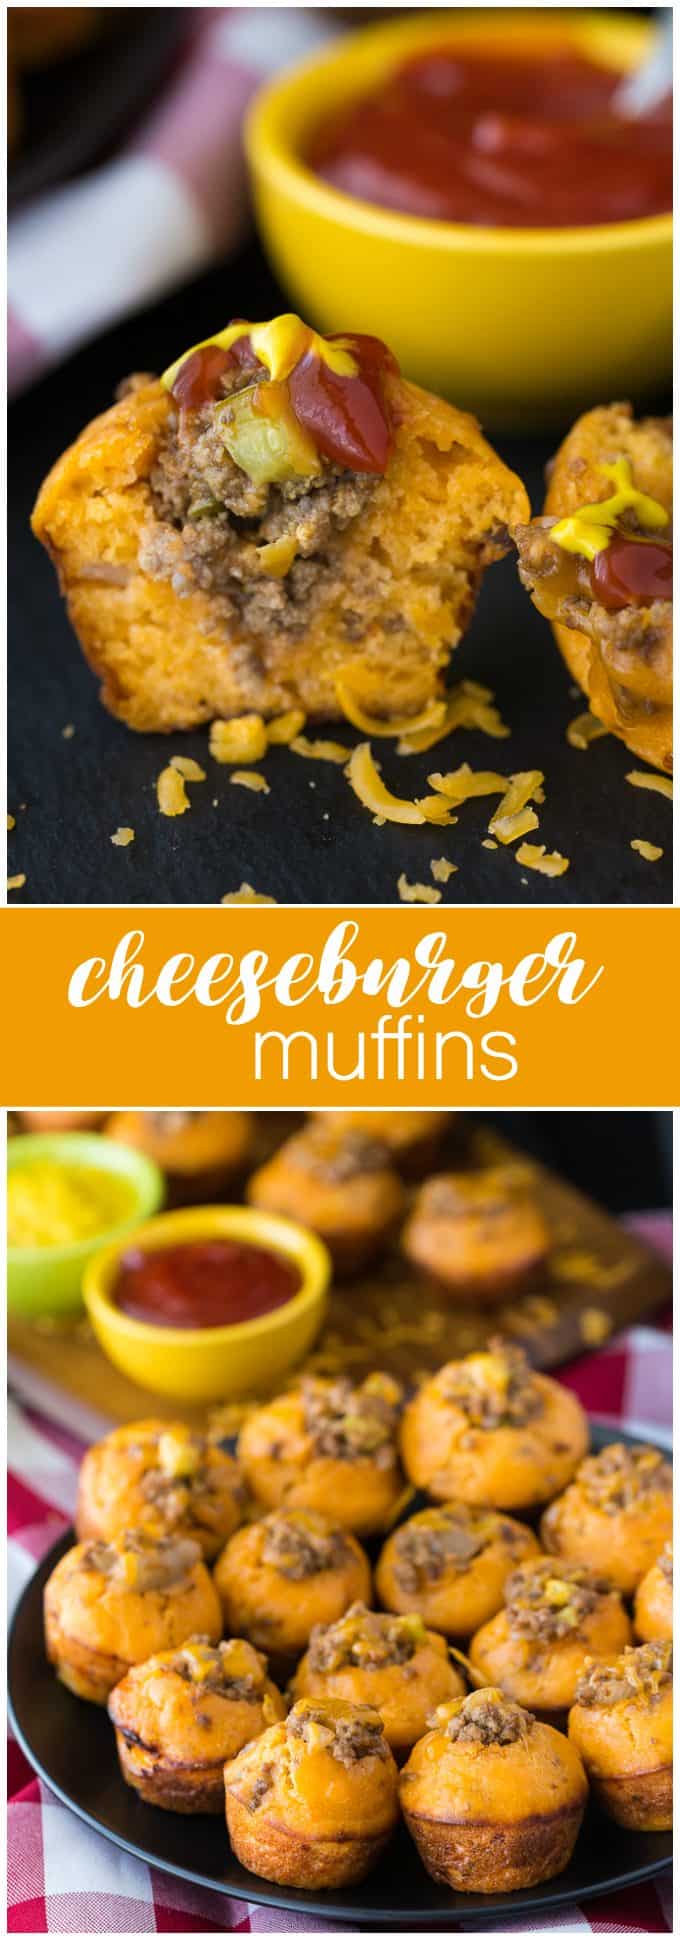 Cheeseburger Muffins - These tailgate treats are stuffed with your favorite burger toppings! Delicious dipped in ketchup and mustard.